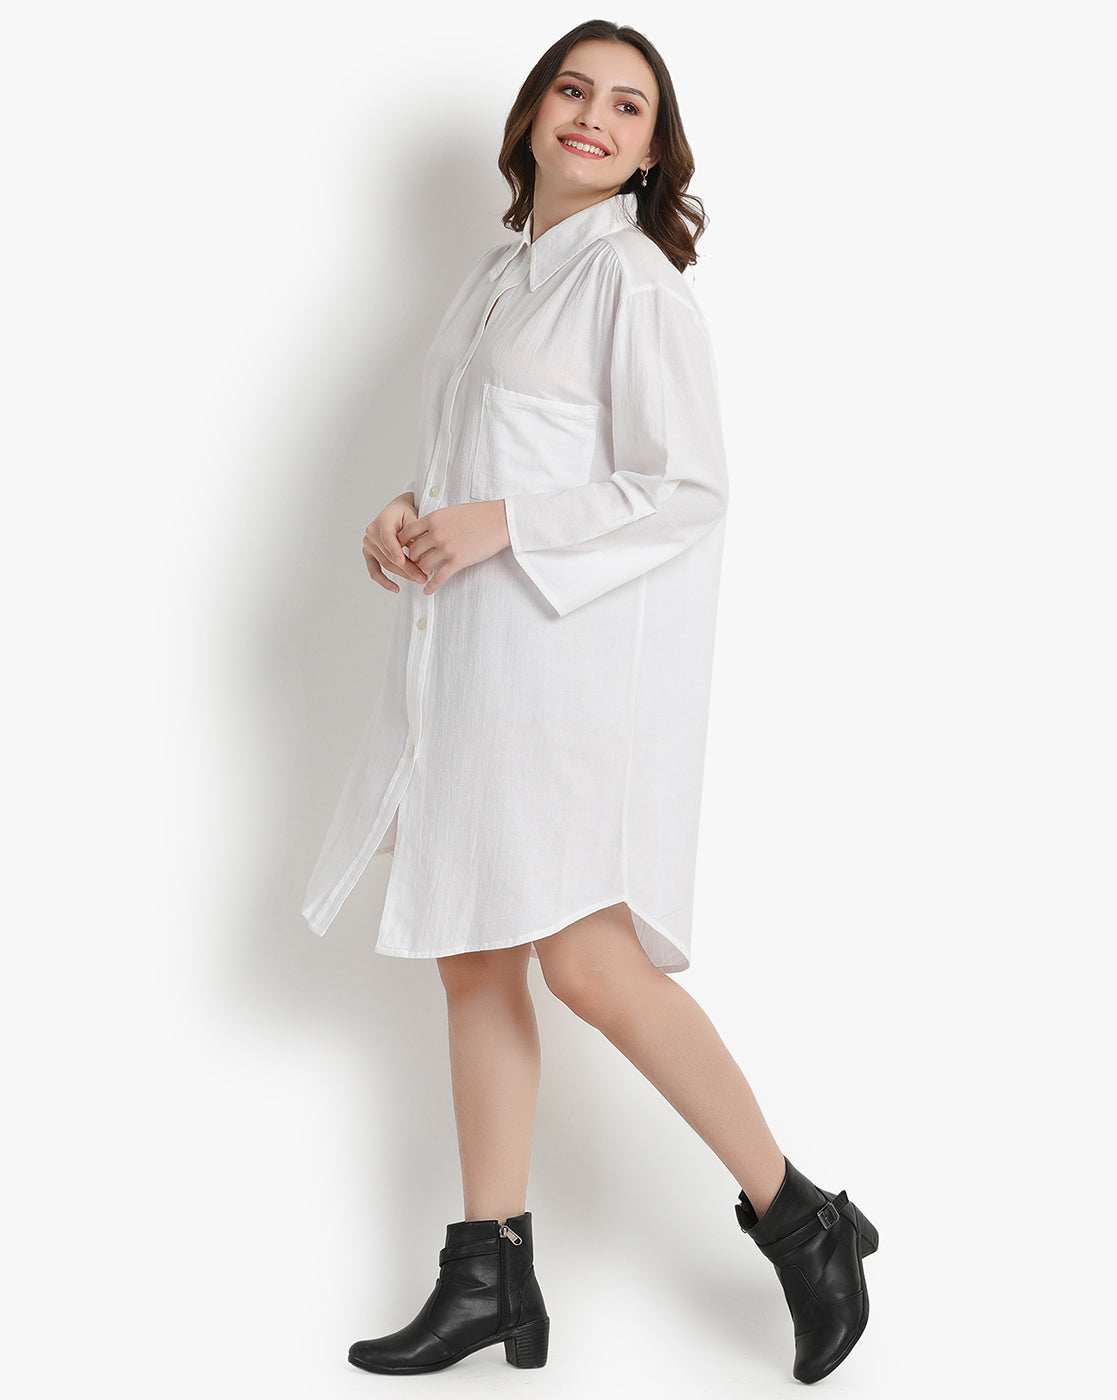 Snowy Chic Button-Down Dress